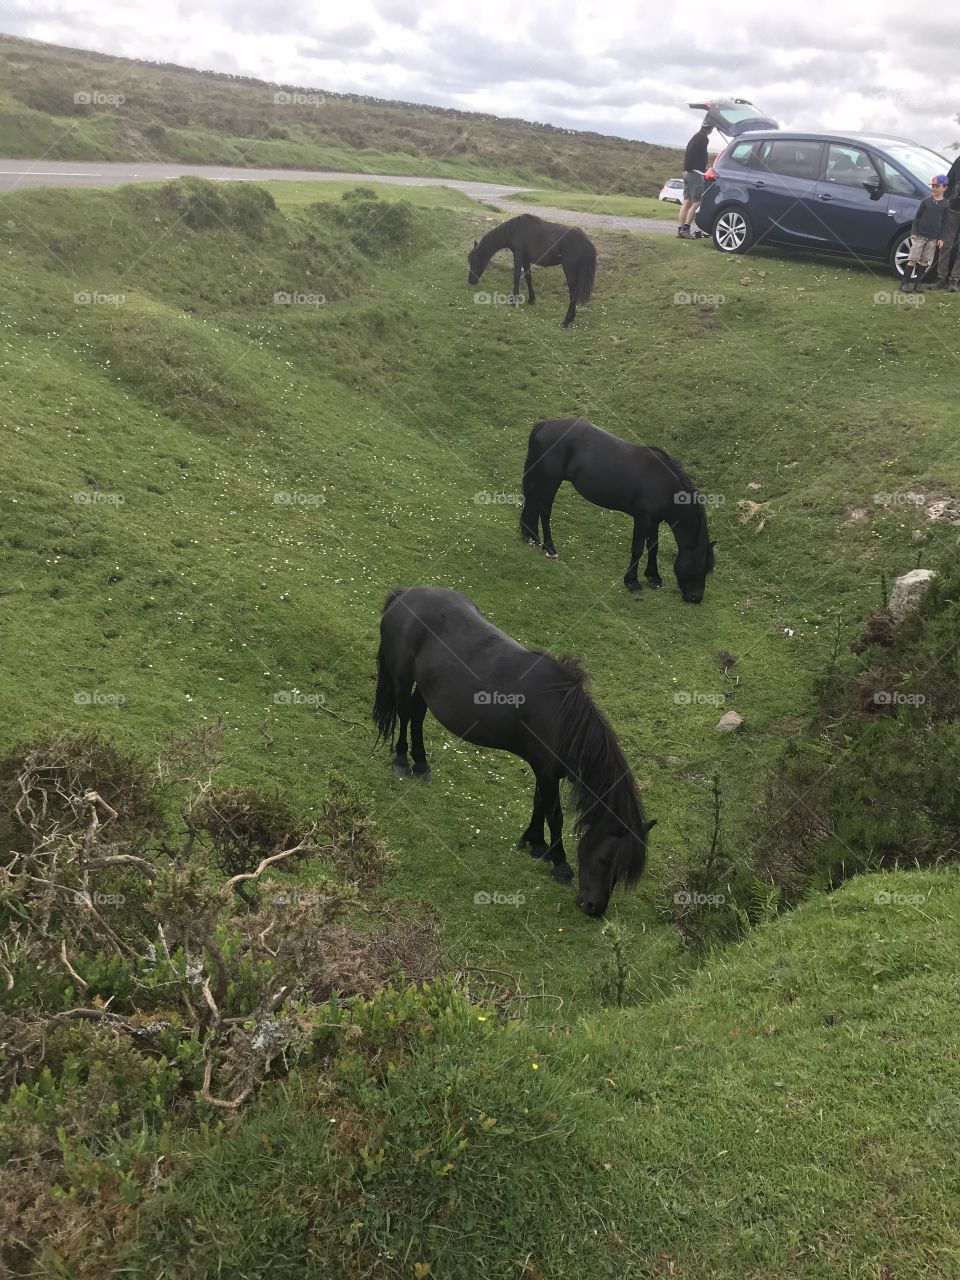 The ponies on Dartmoor, wild though they are were calm and contented and enjoying a mild climate.